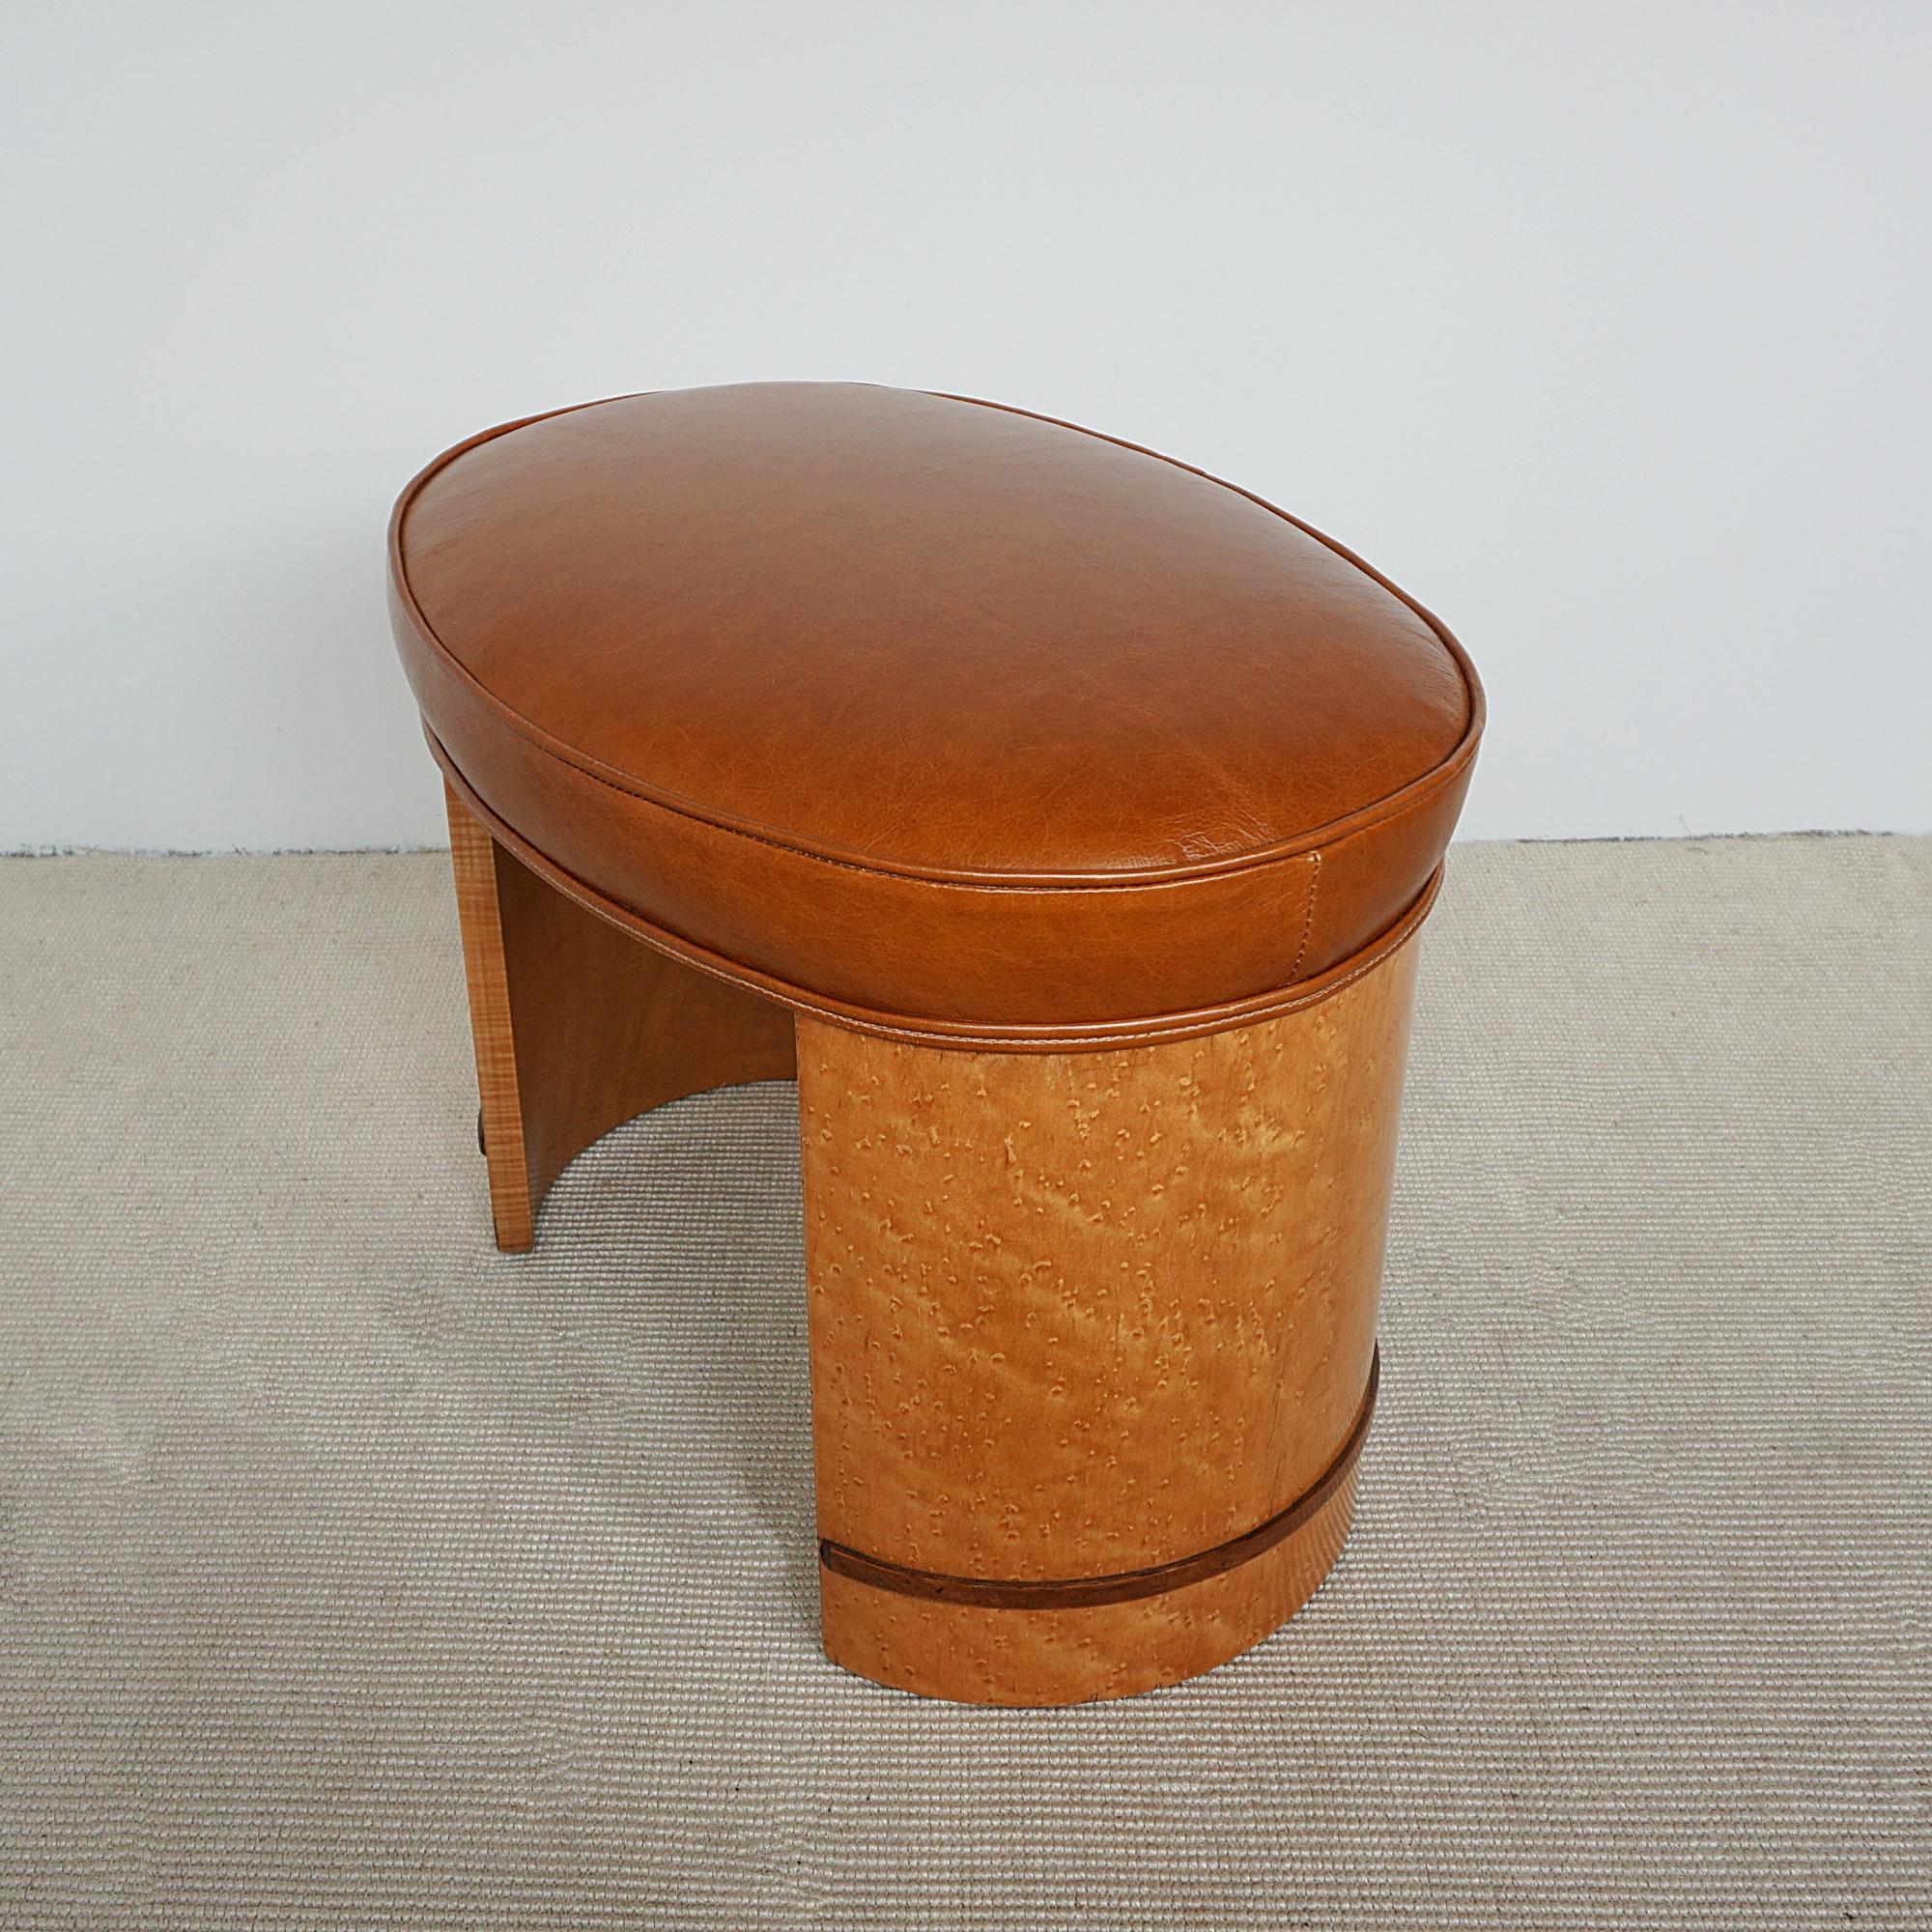 Early 20th Century Art Deco Birdseye Maple Veneered Stool With Brown Leather Re-upholstery For Sale